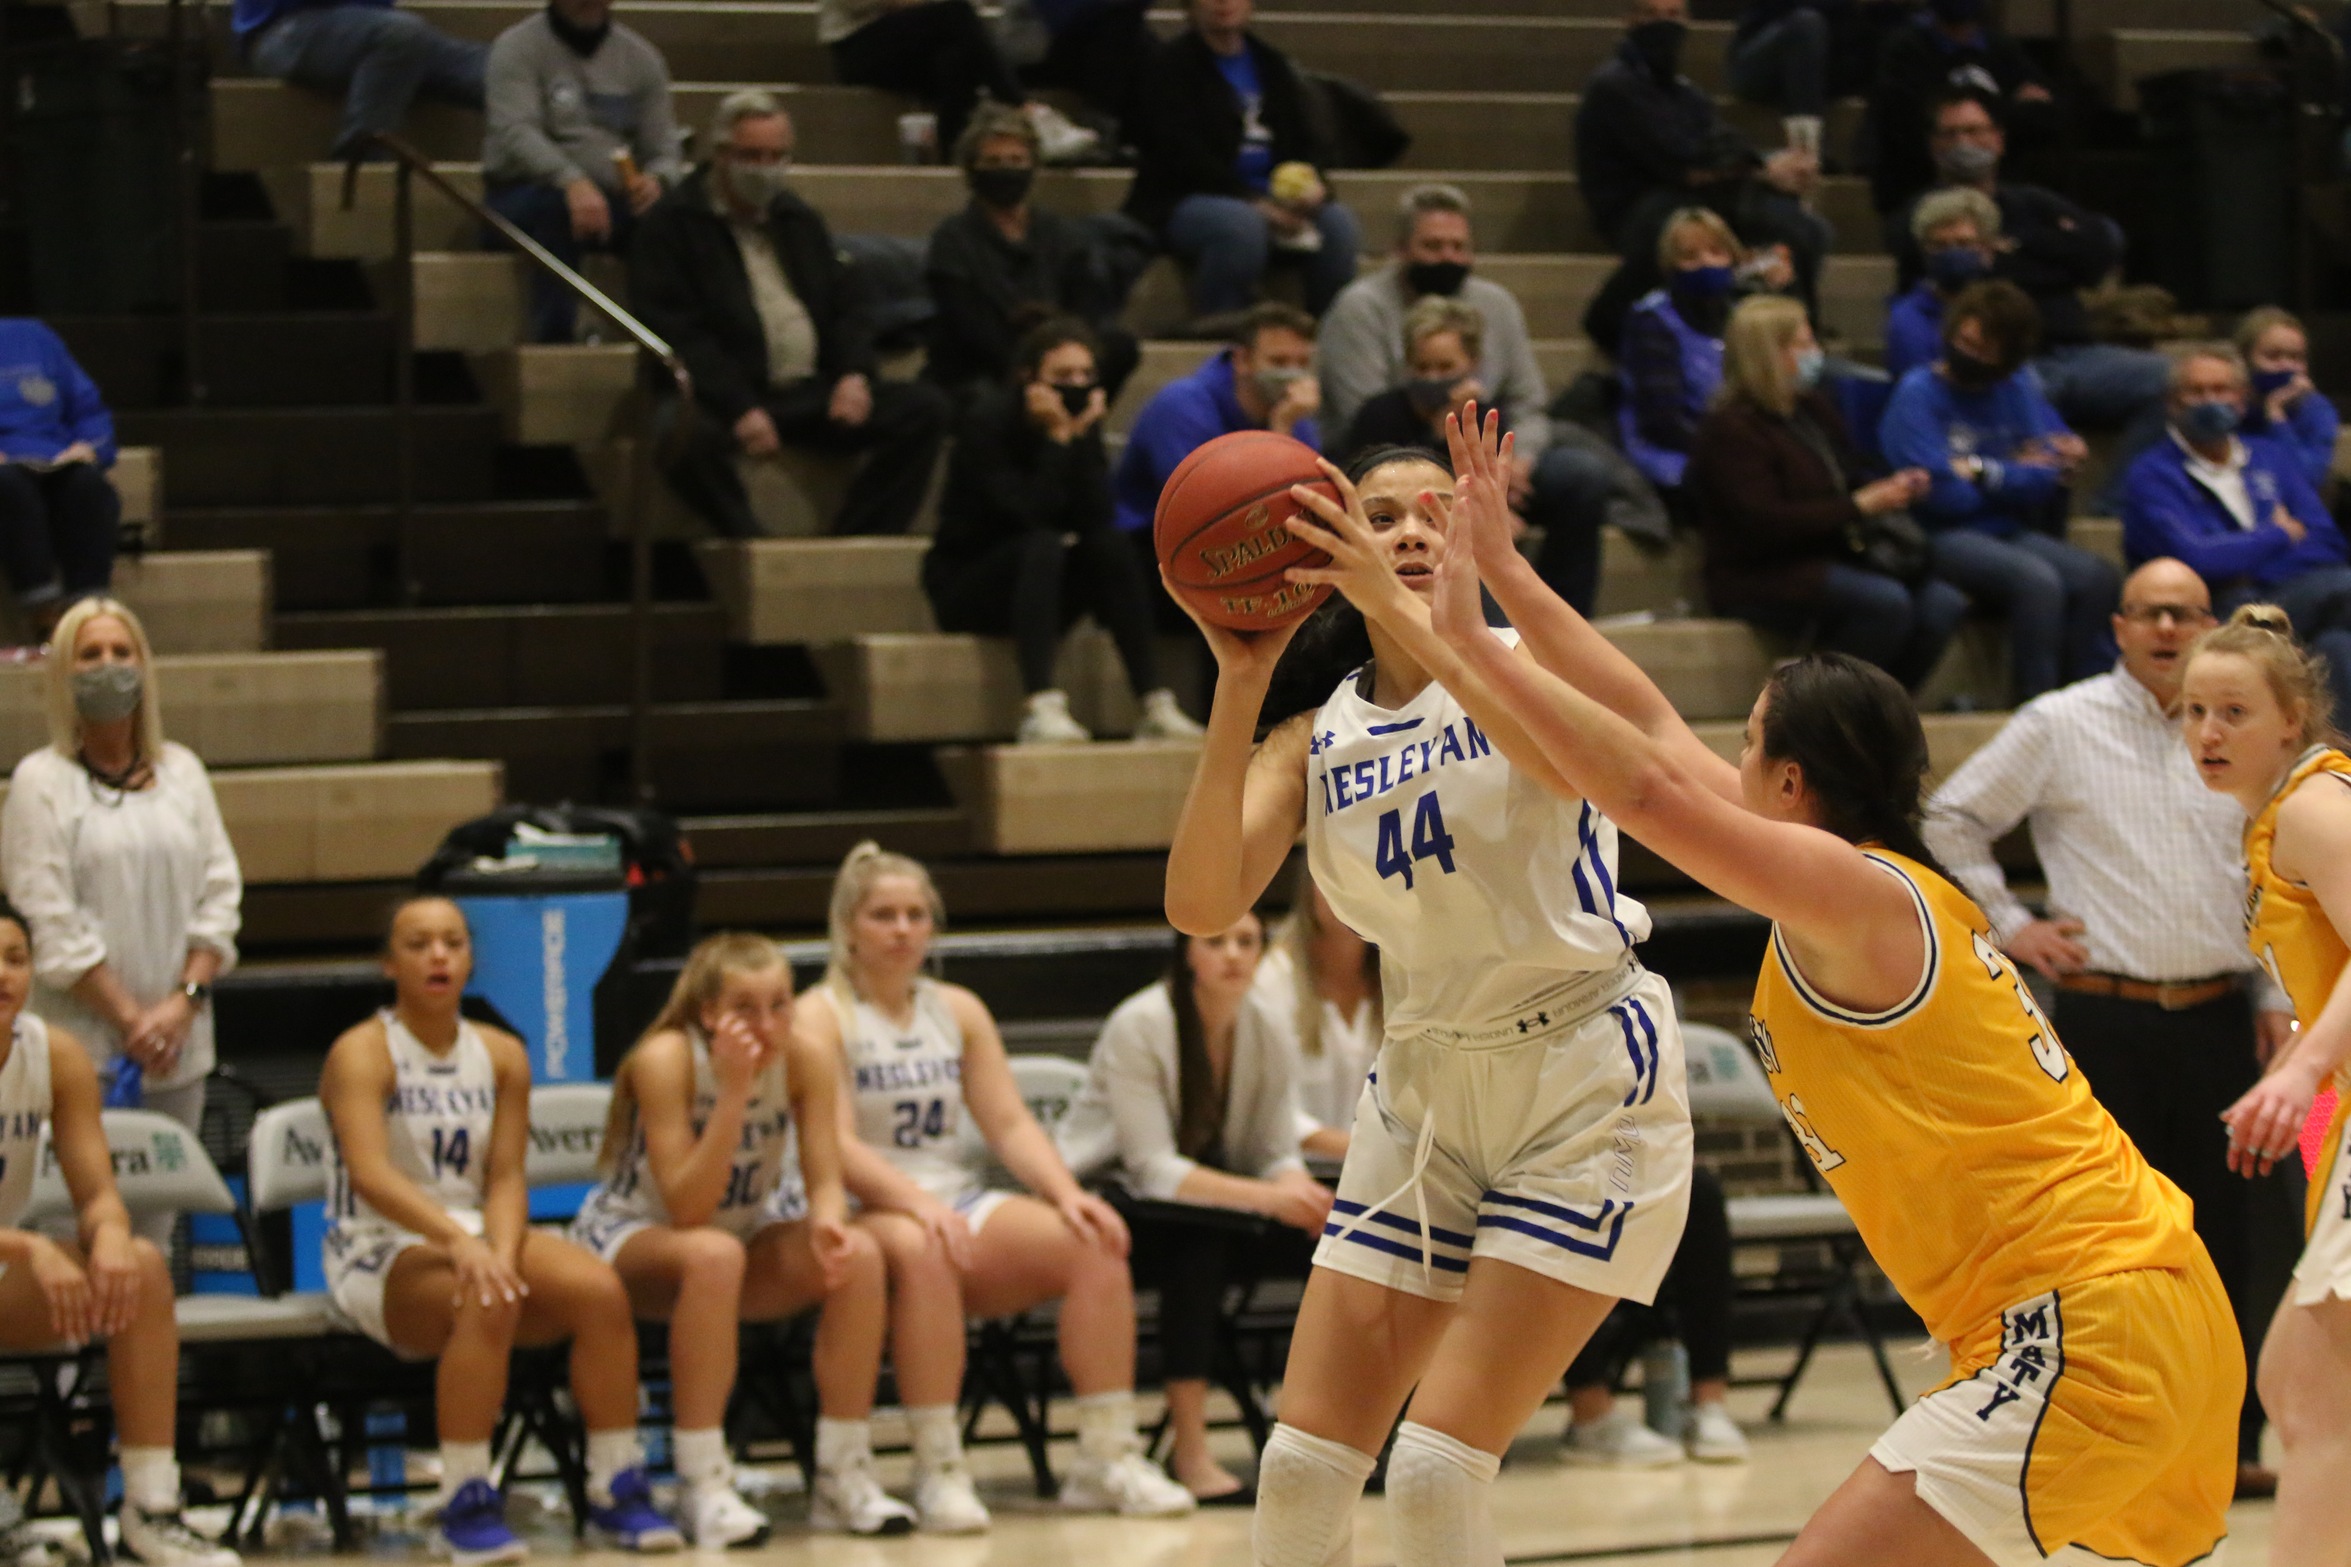 DAKOTA WESLEYAN HANDLES VIKINGS IN NAIA BASKETBALL CLASSIC, CAMPBELL WITH A GAME-HIGH 18 POINTS